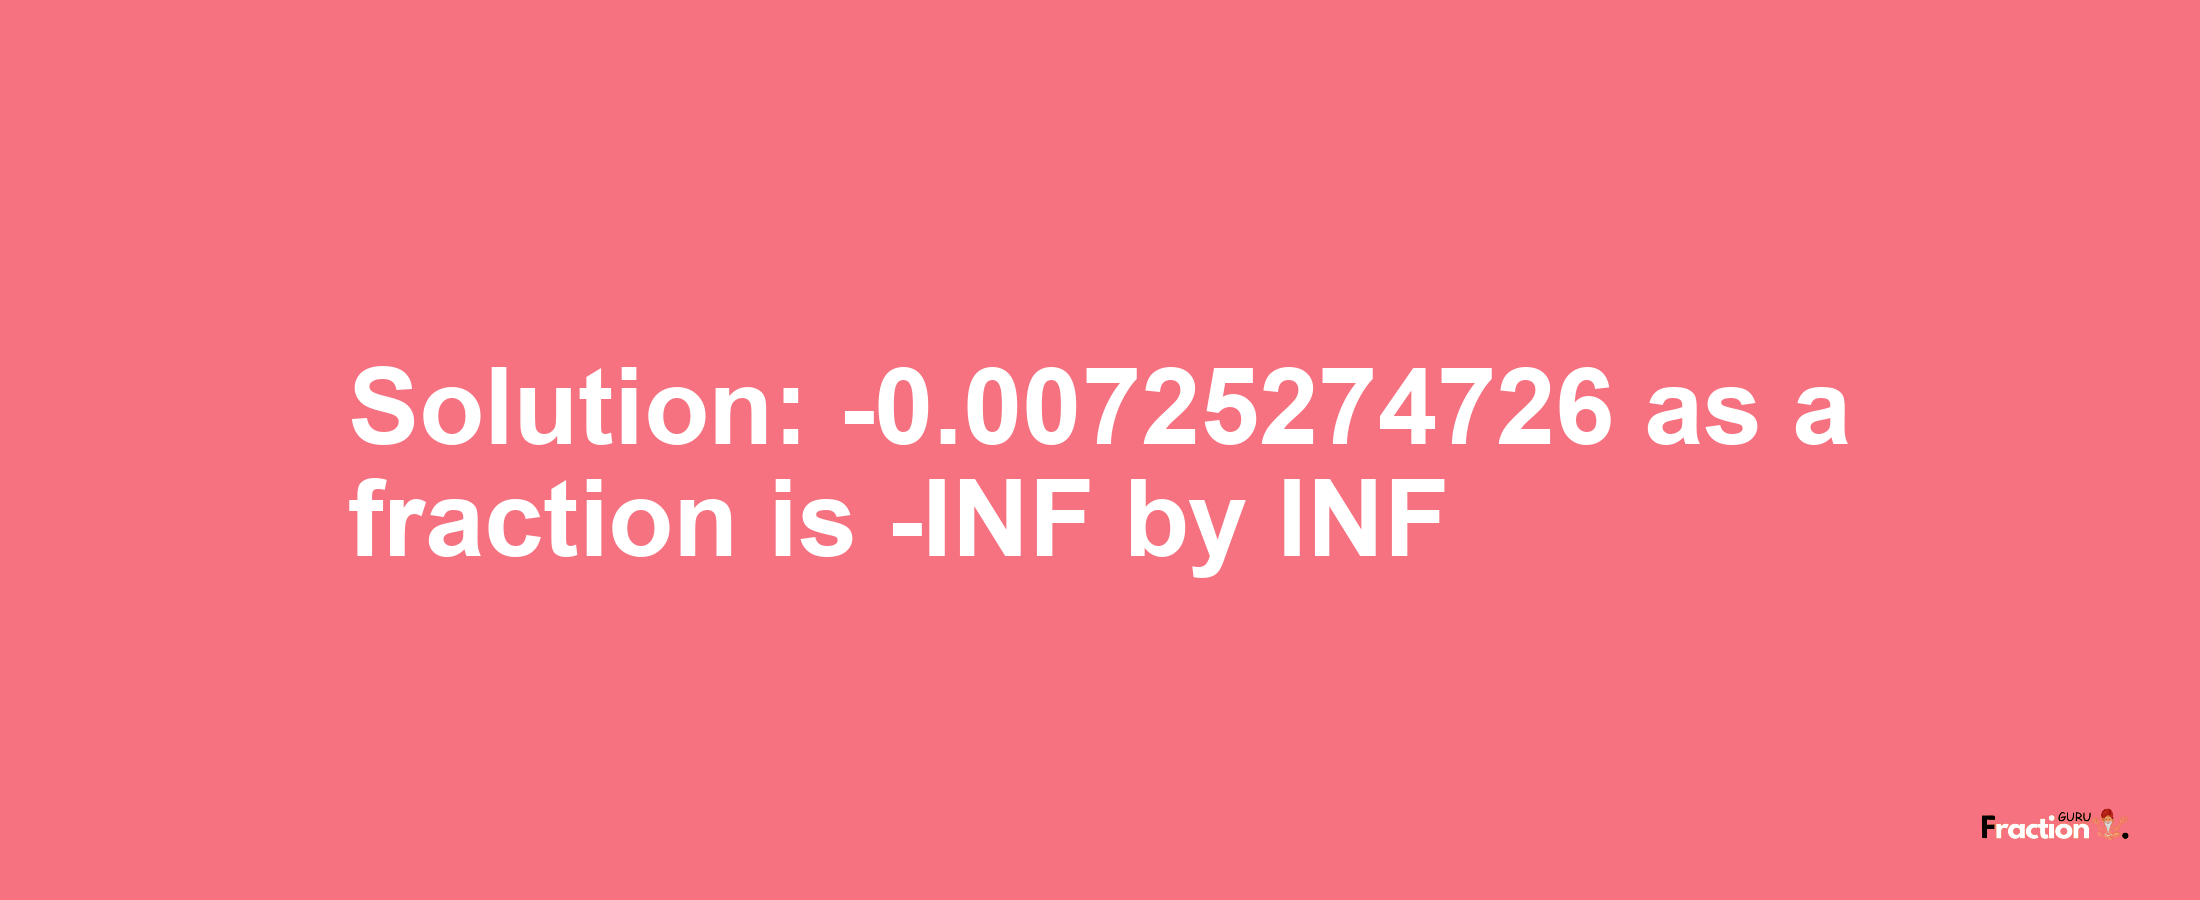 Solution:-0.00725274726 as a fraction is -INF/INF